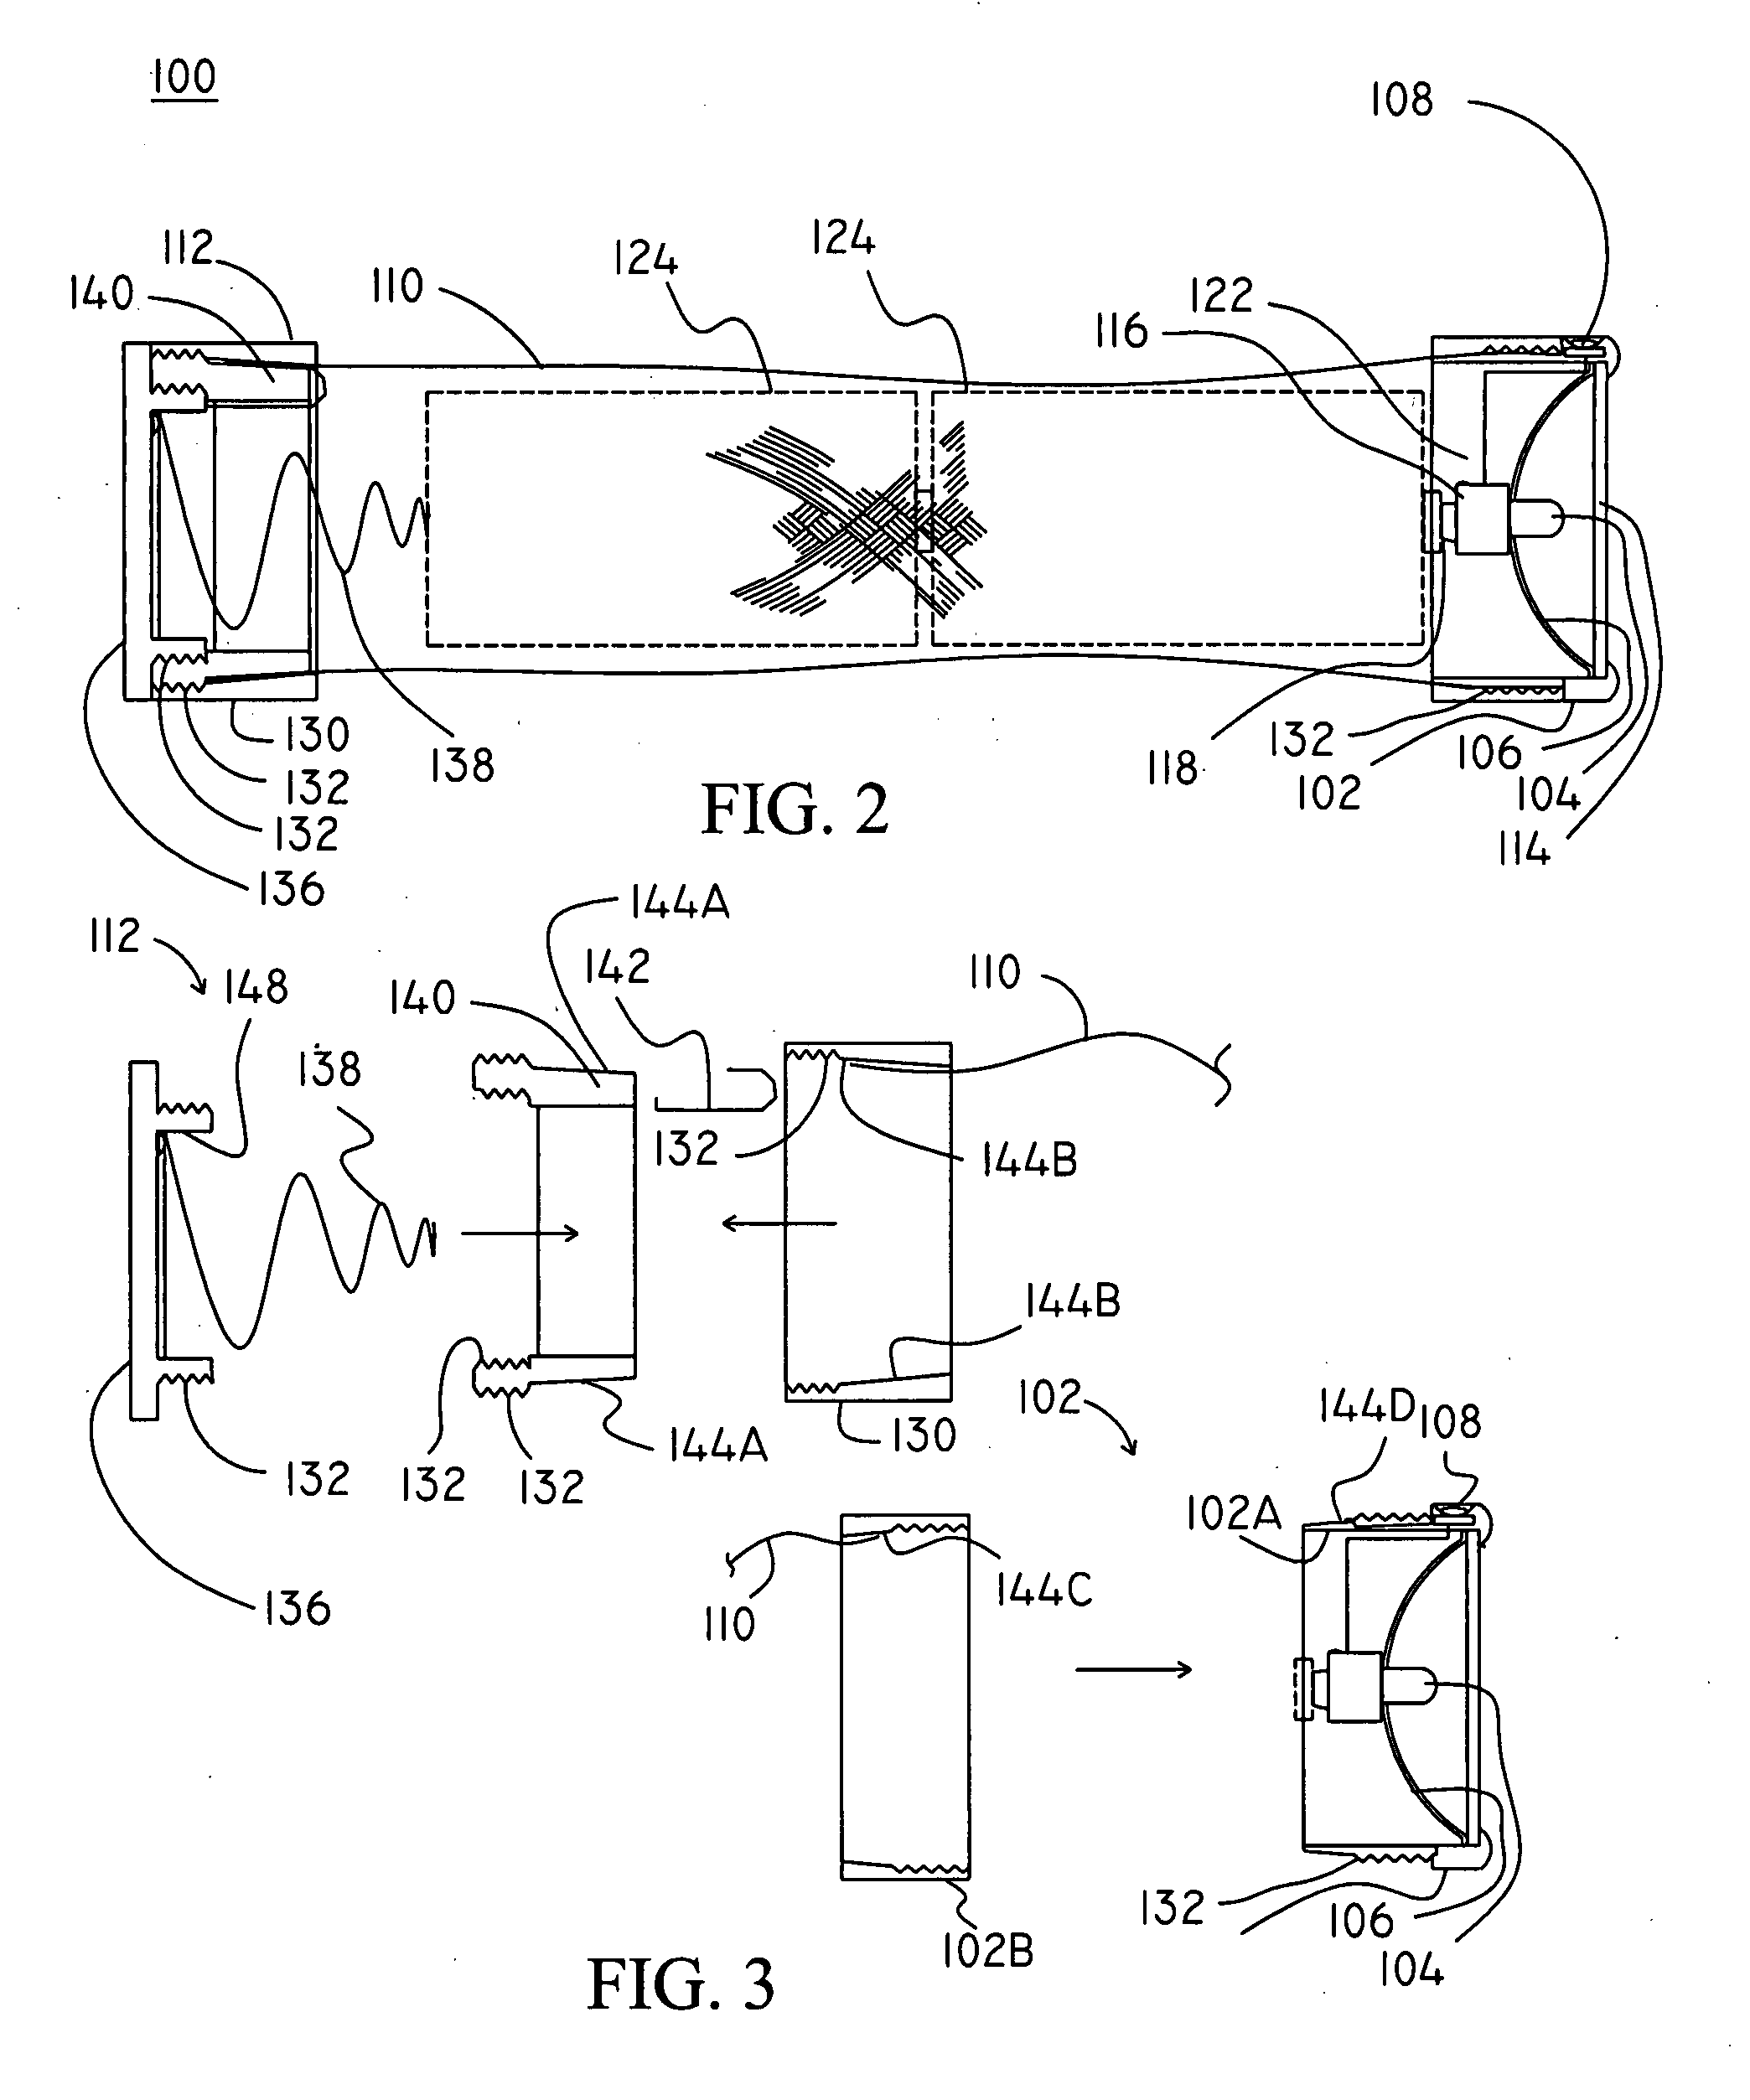 Flexible battery container and method of use